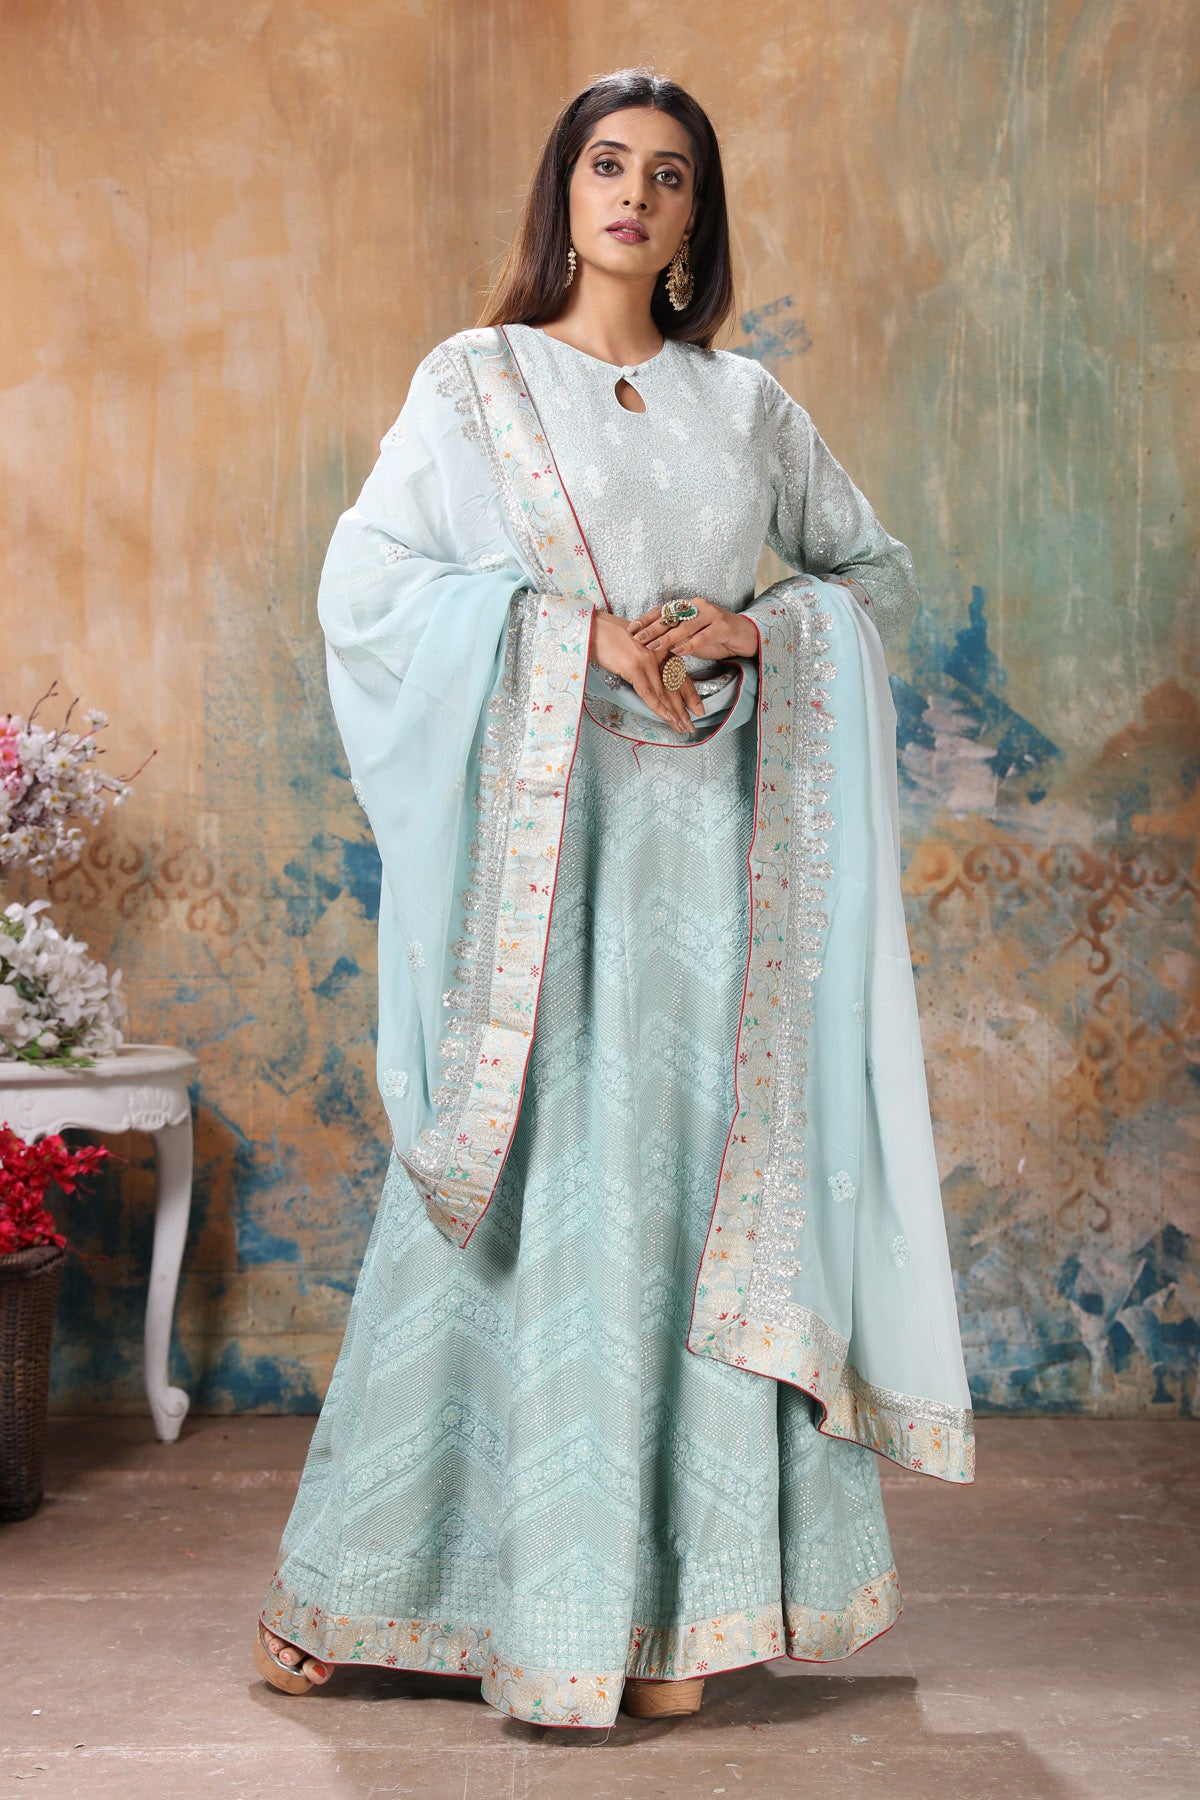 Buy Daisy white anarkali suit in georgette with lucknowi thread embroidered  kalis and mughal motifs on the border.